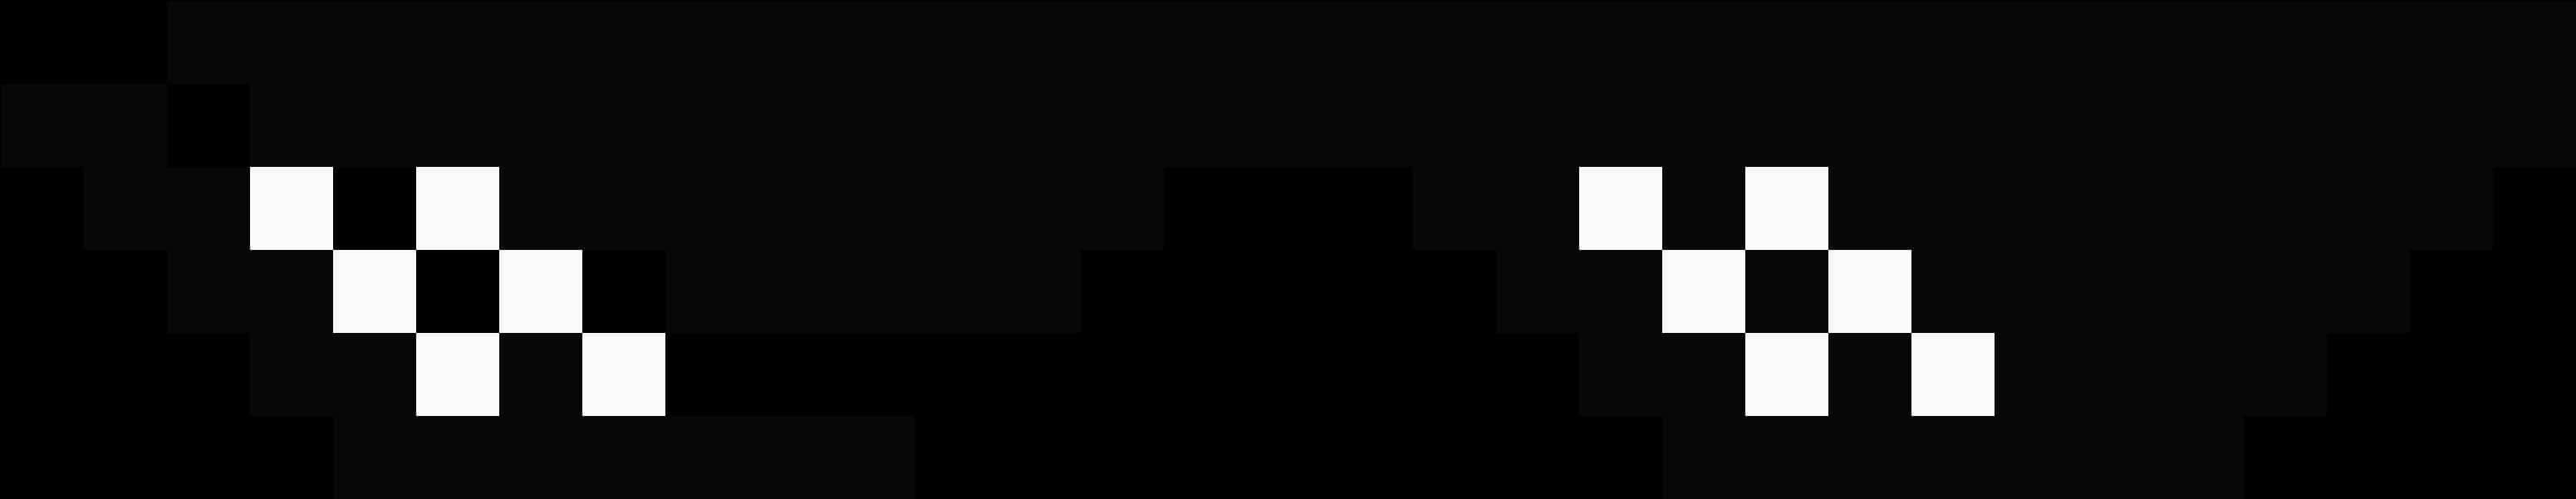 A Black Background With A Square In The Middle